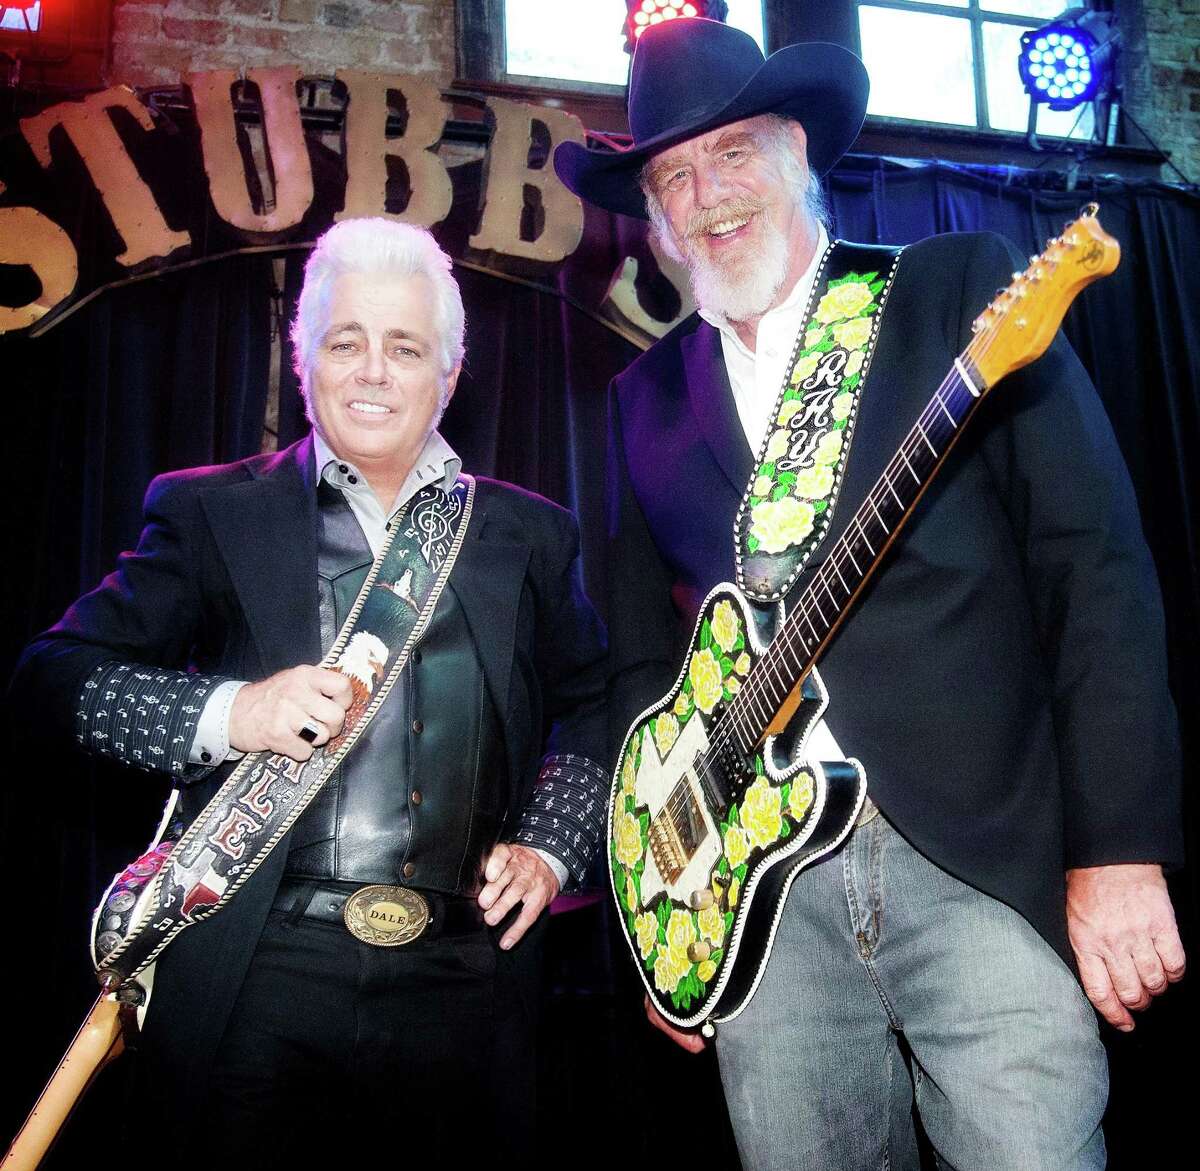 The new duo Dale & Ray includes honky-tonkin' Dale Watson (left) and western swing band leader Ray Benson